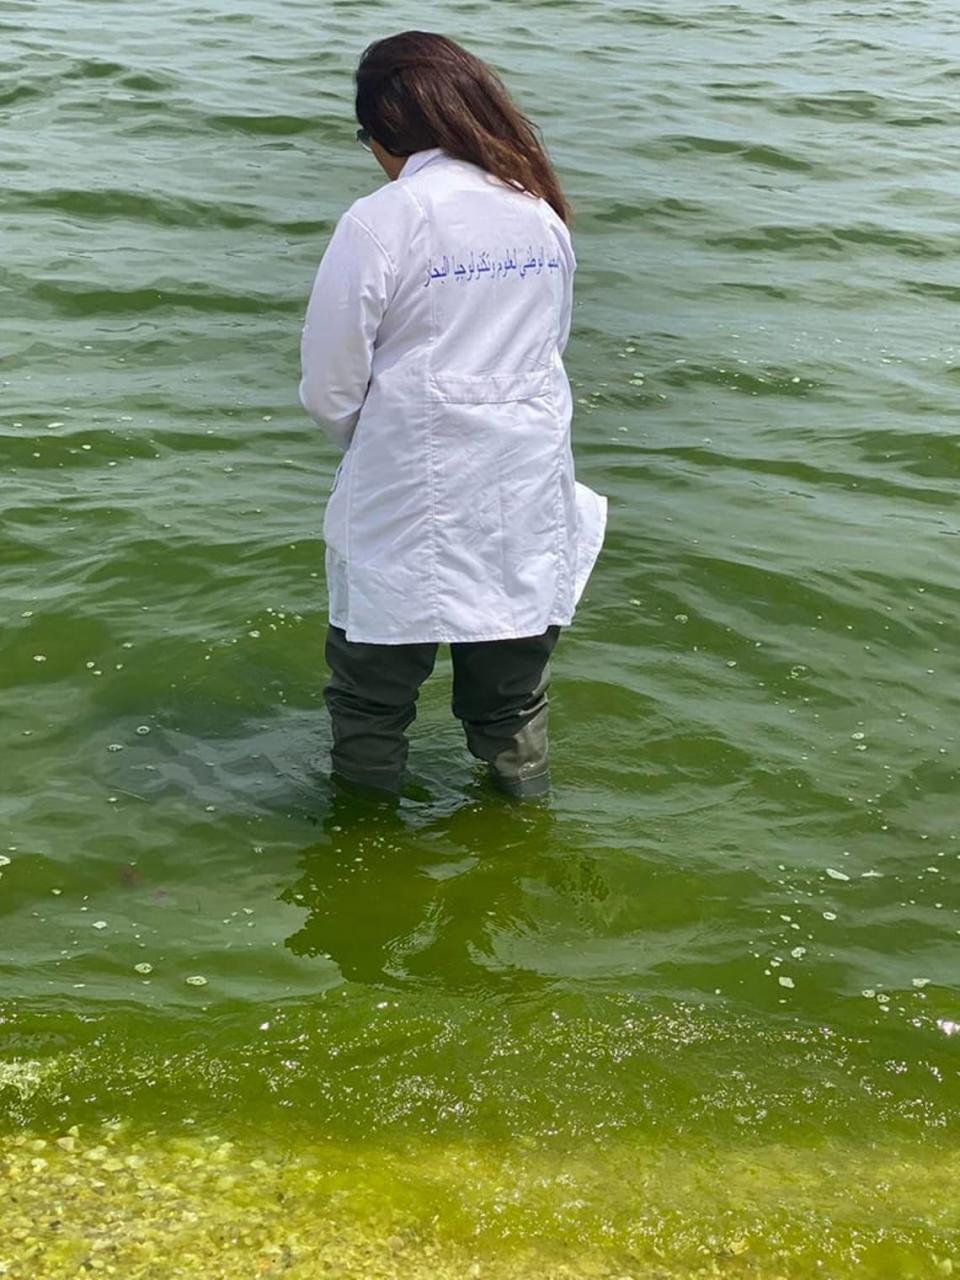 A researcher stands in the green water to take samples.